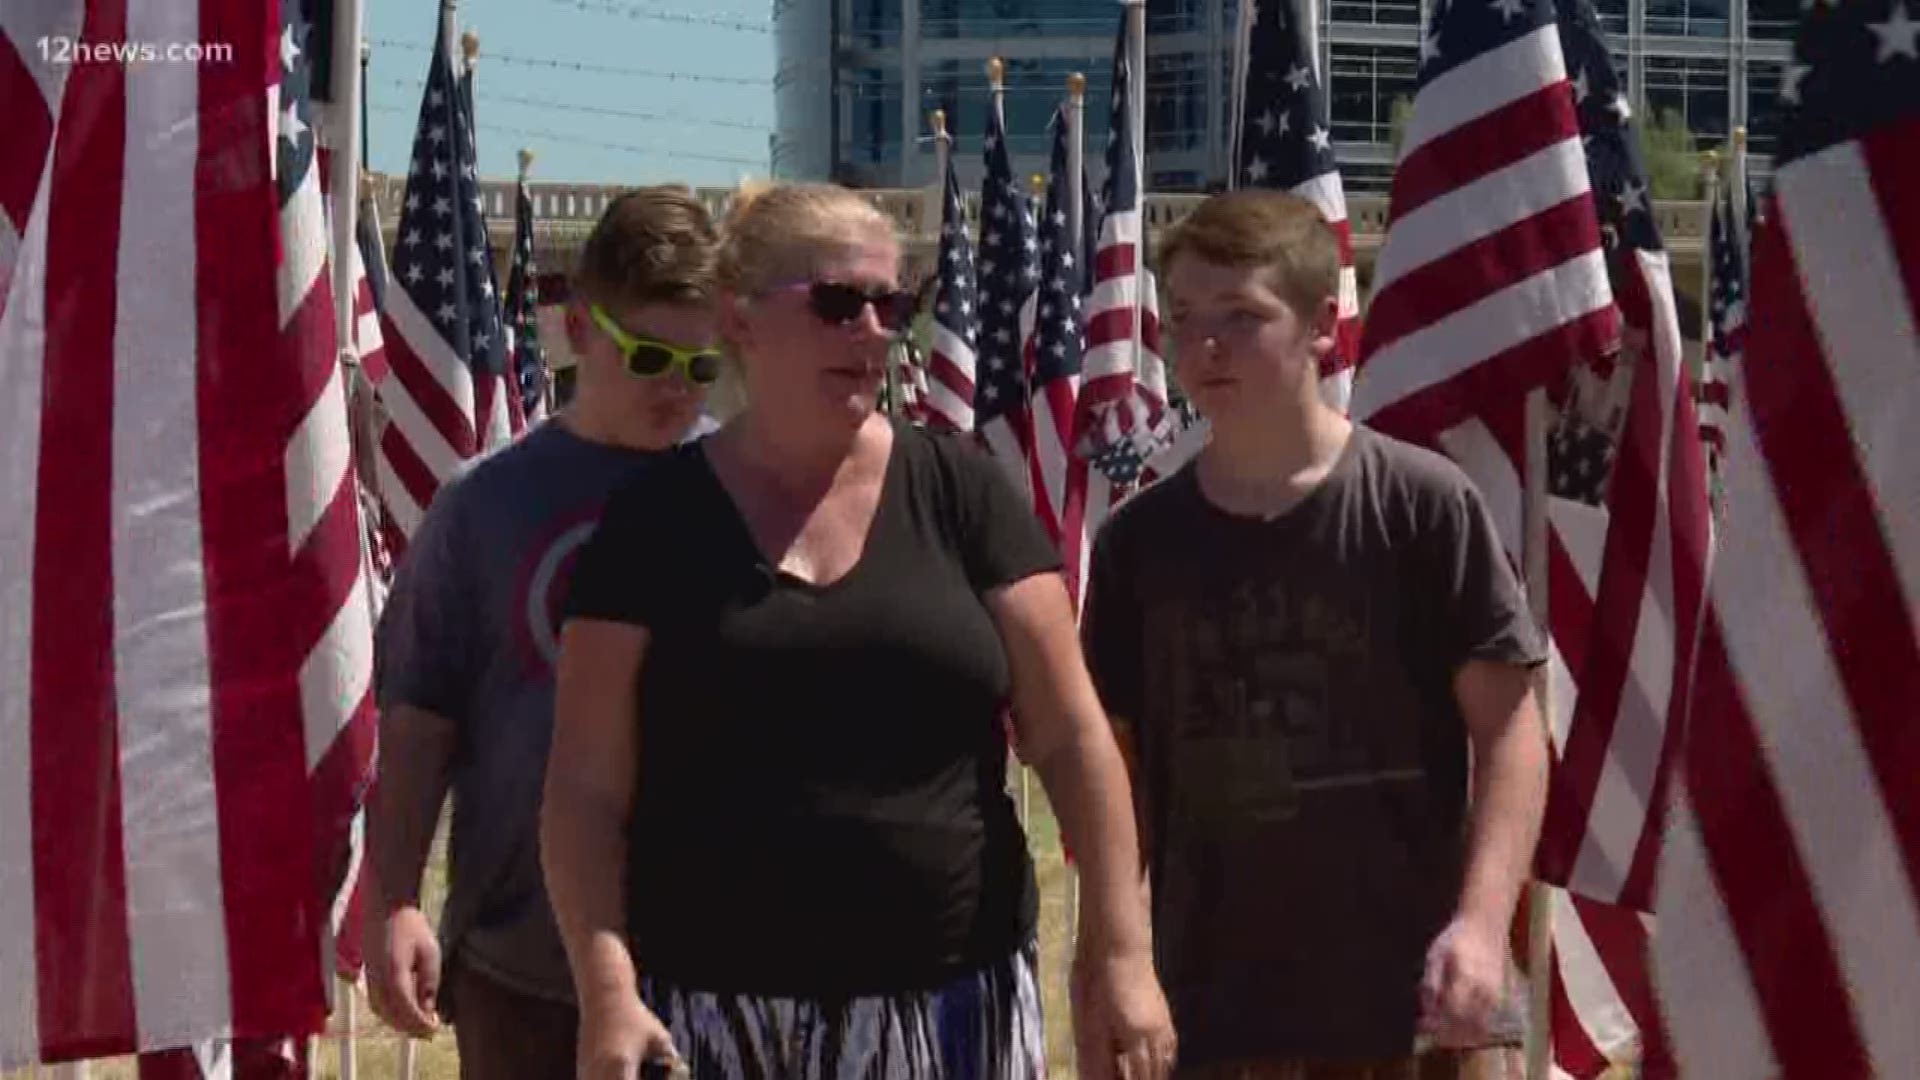 Thousands of flags were put up at Healing Field in Tempe in honor of the lives lost on 9/11. Today, a family let 12 News follow them as parents explain the significance of the day to kids who were not alive on that day.